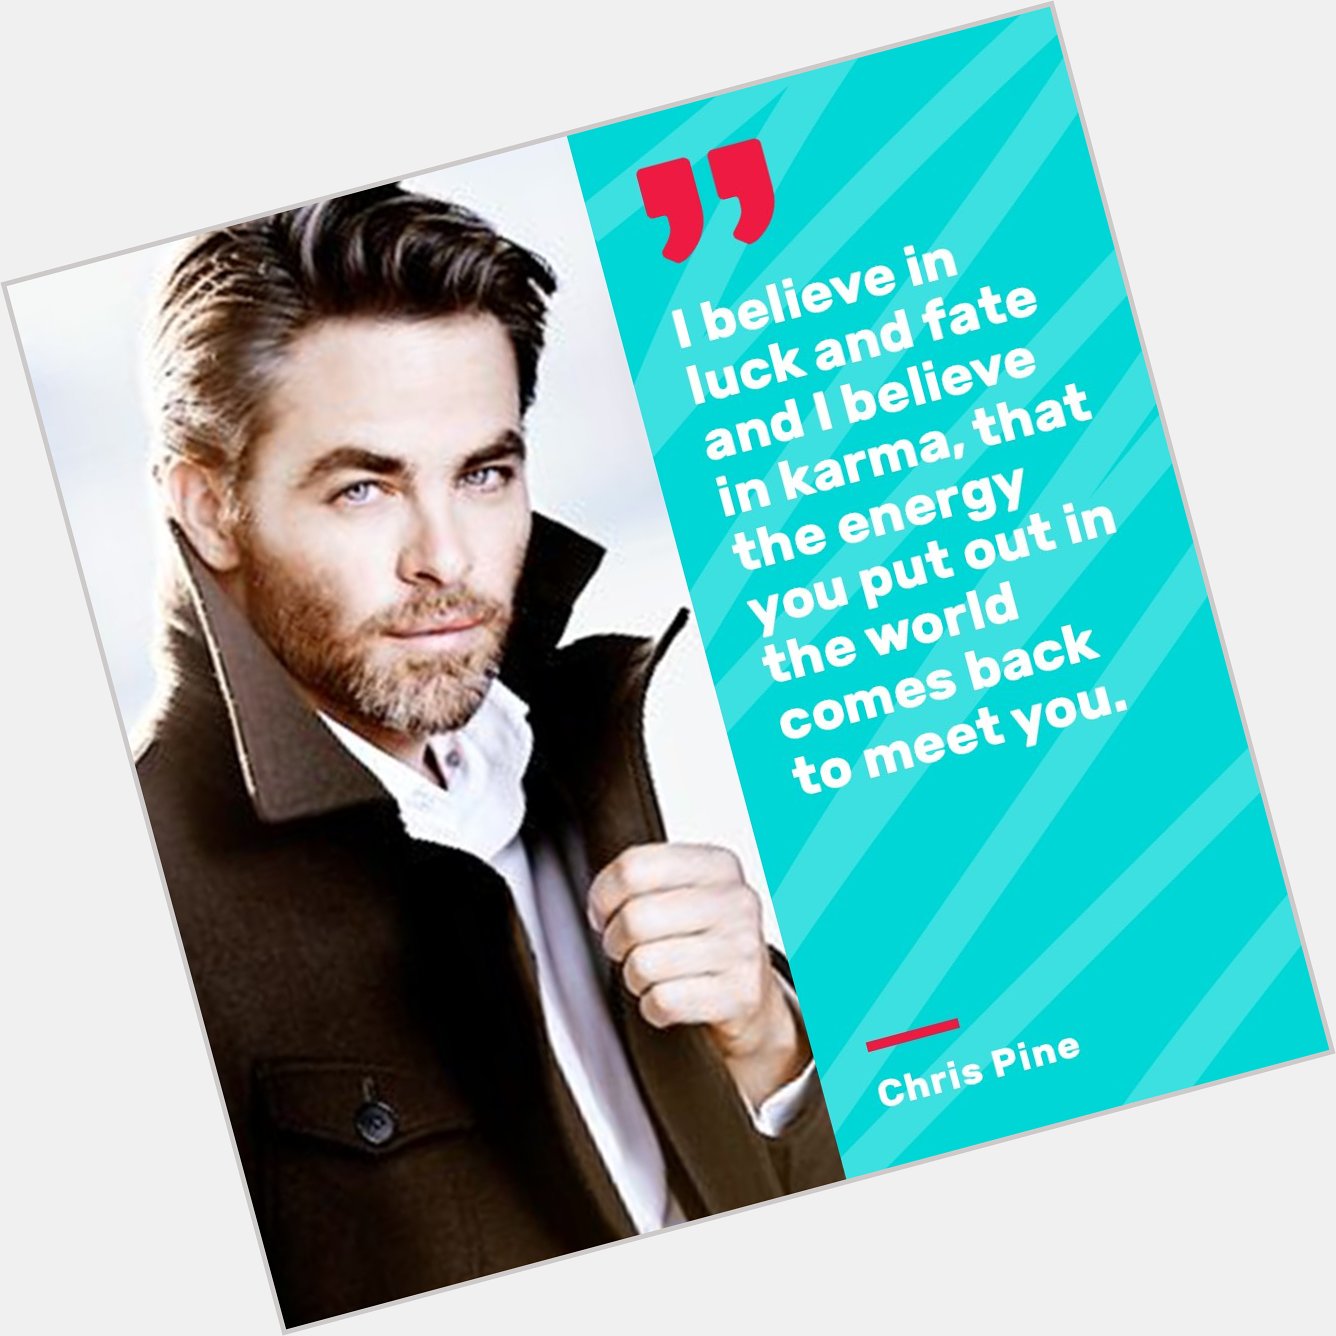 Happy Birthday, Chris Pine! May you live long and prosper with those baby blues  